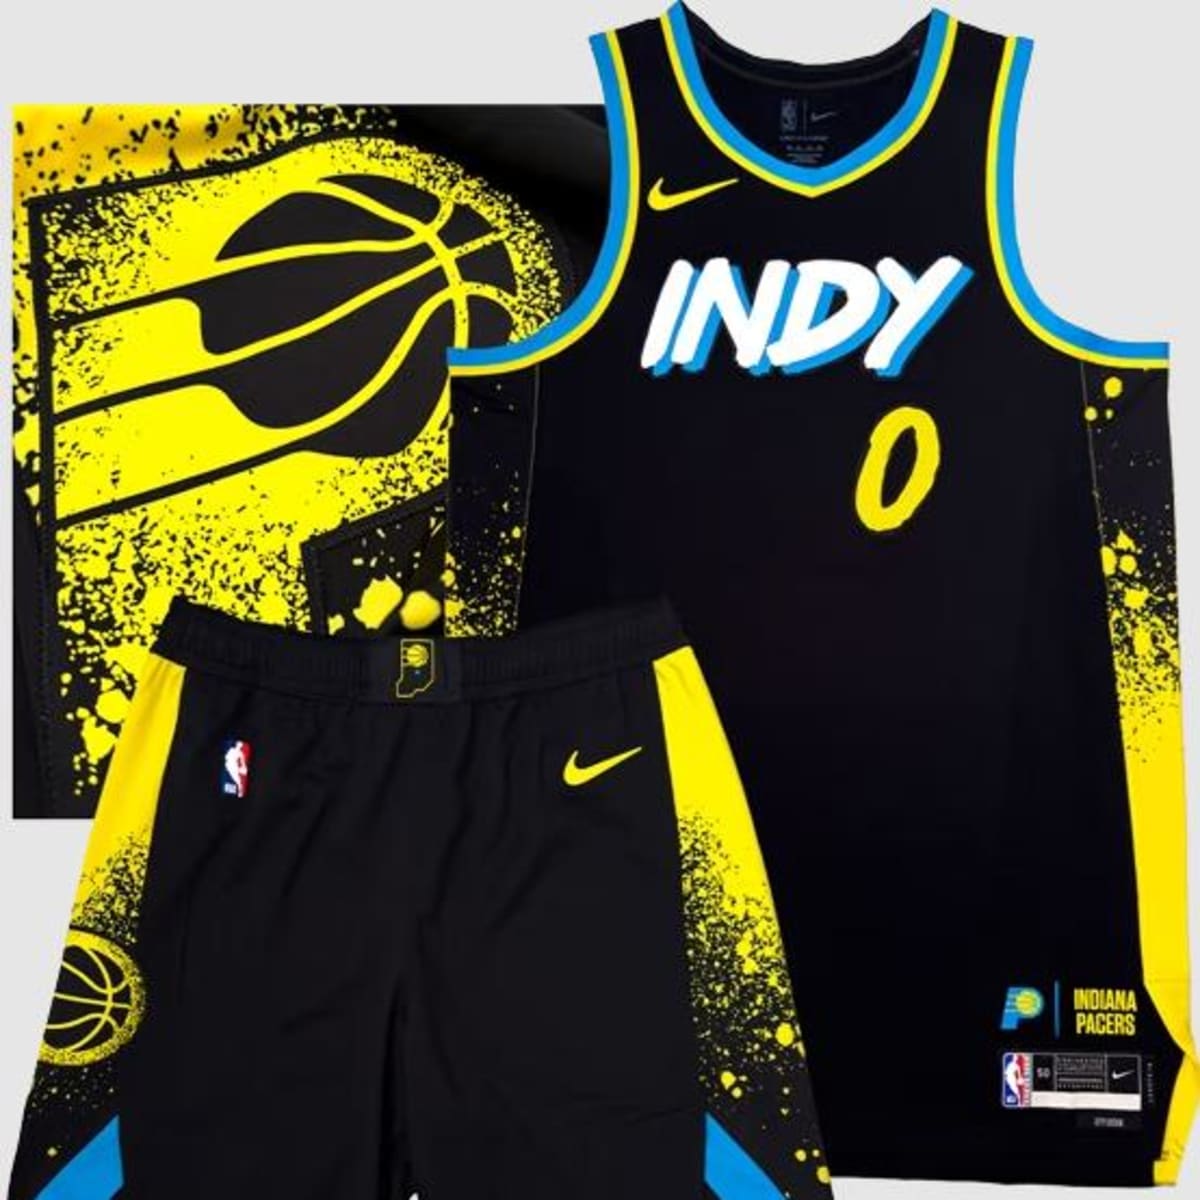 Indiana Pacers reveal City Edition uniforms for 2023-24 season